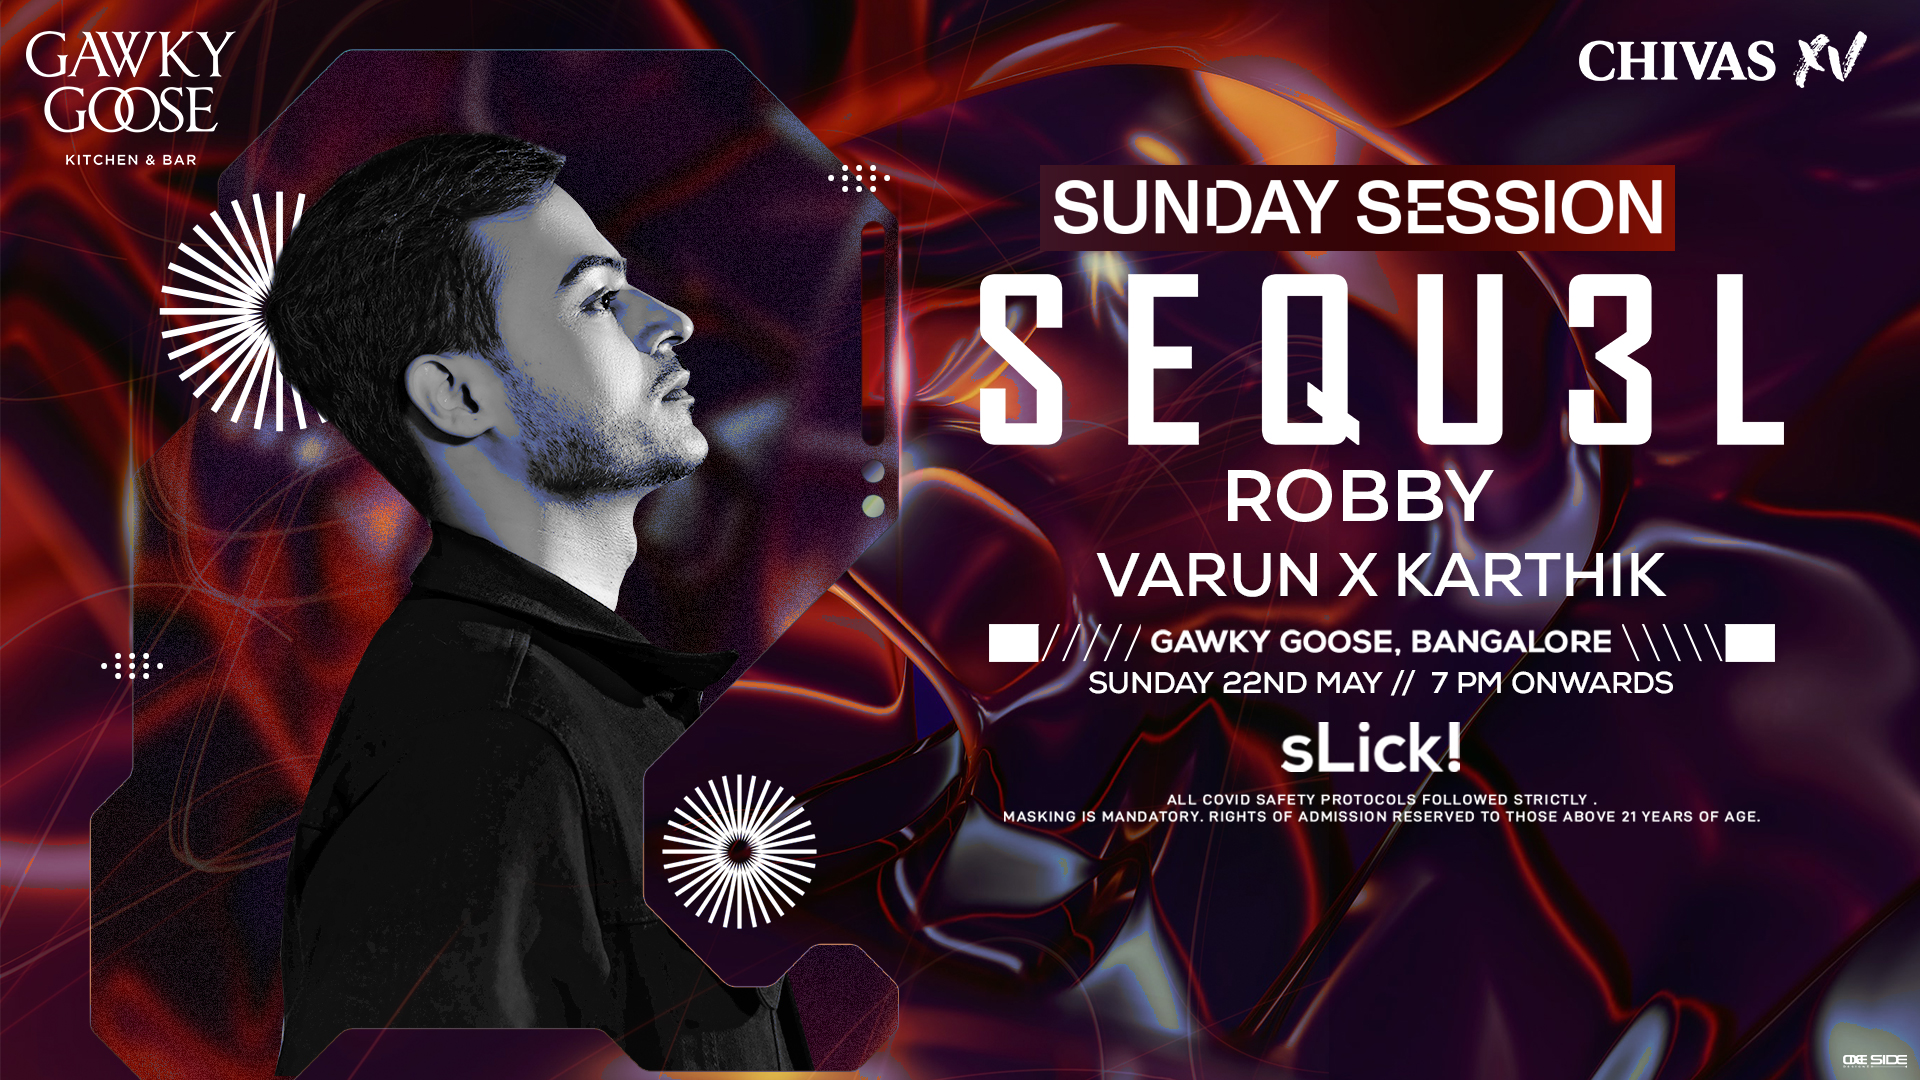 Sunday Session ft. Sequ3l + Robby